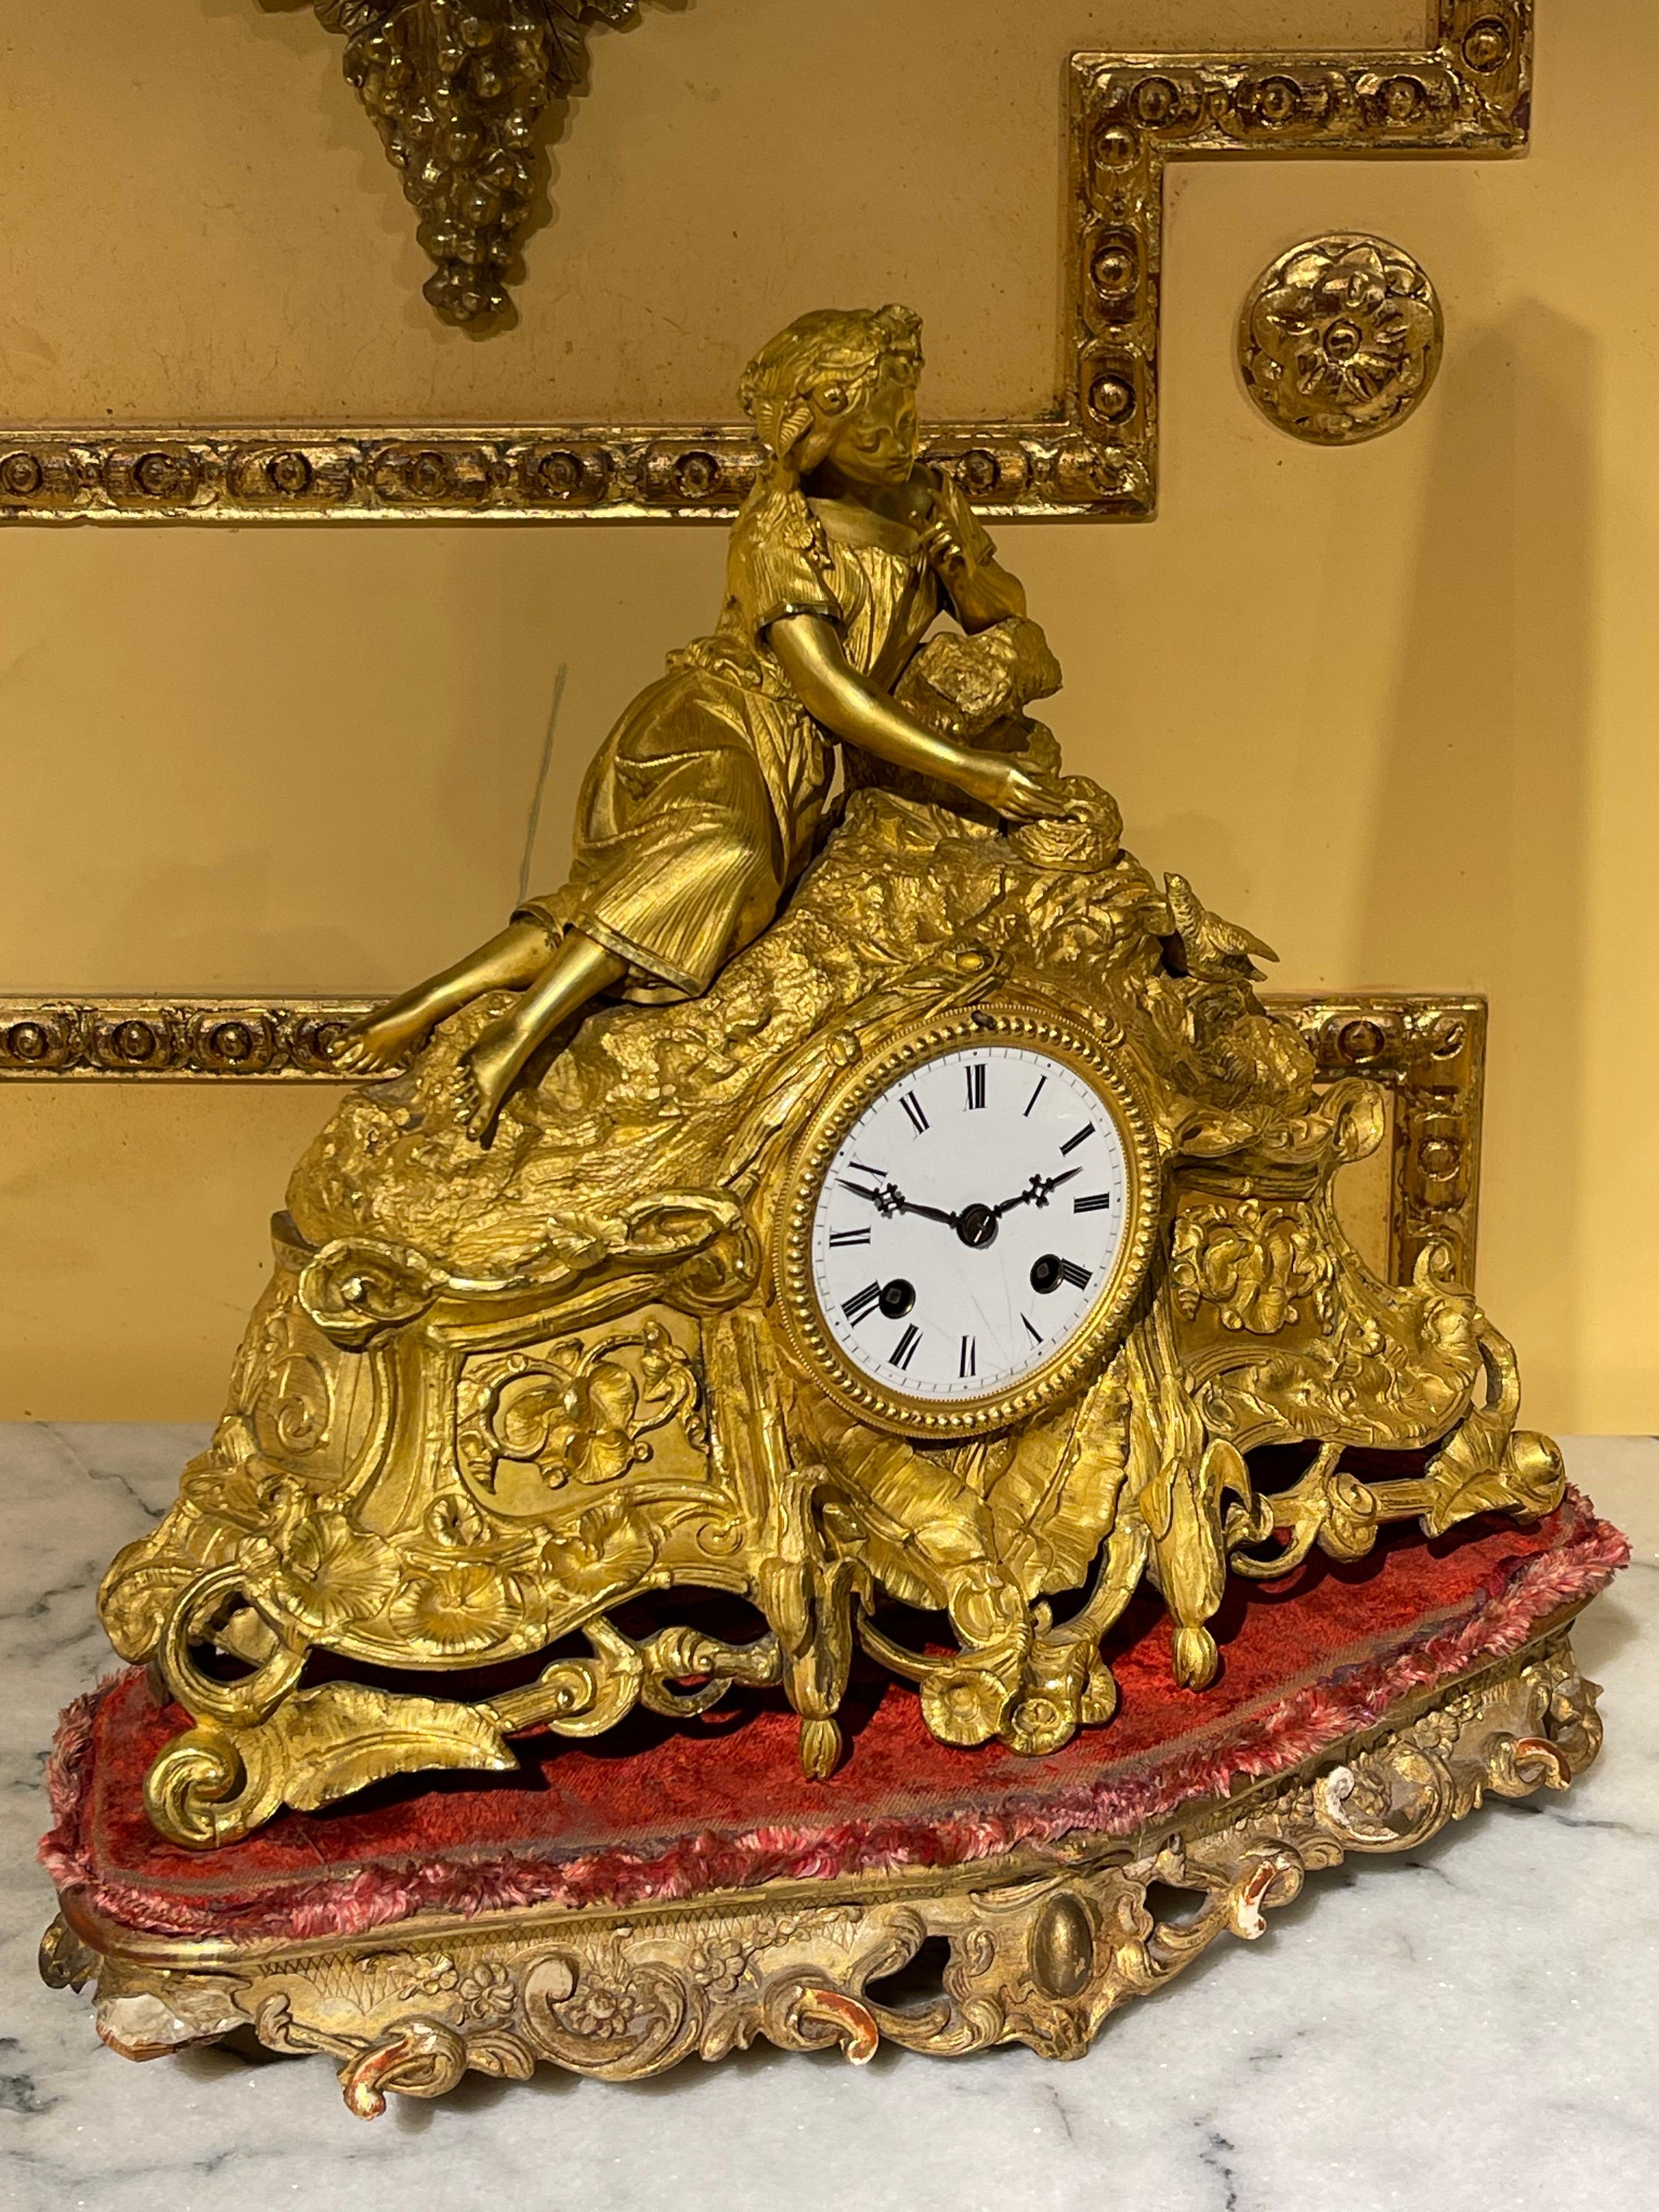 French mantel clock / pendulum clock, fire-gilt, around 1870-1880

Solid bronze, fire-gilded, french around 1870-1880, original French historicism.

An absolute eye catcher.
Finely chiselled gold-plated bronze in the best quality.

Functional